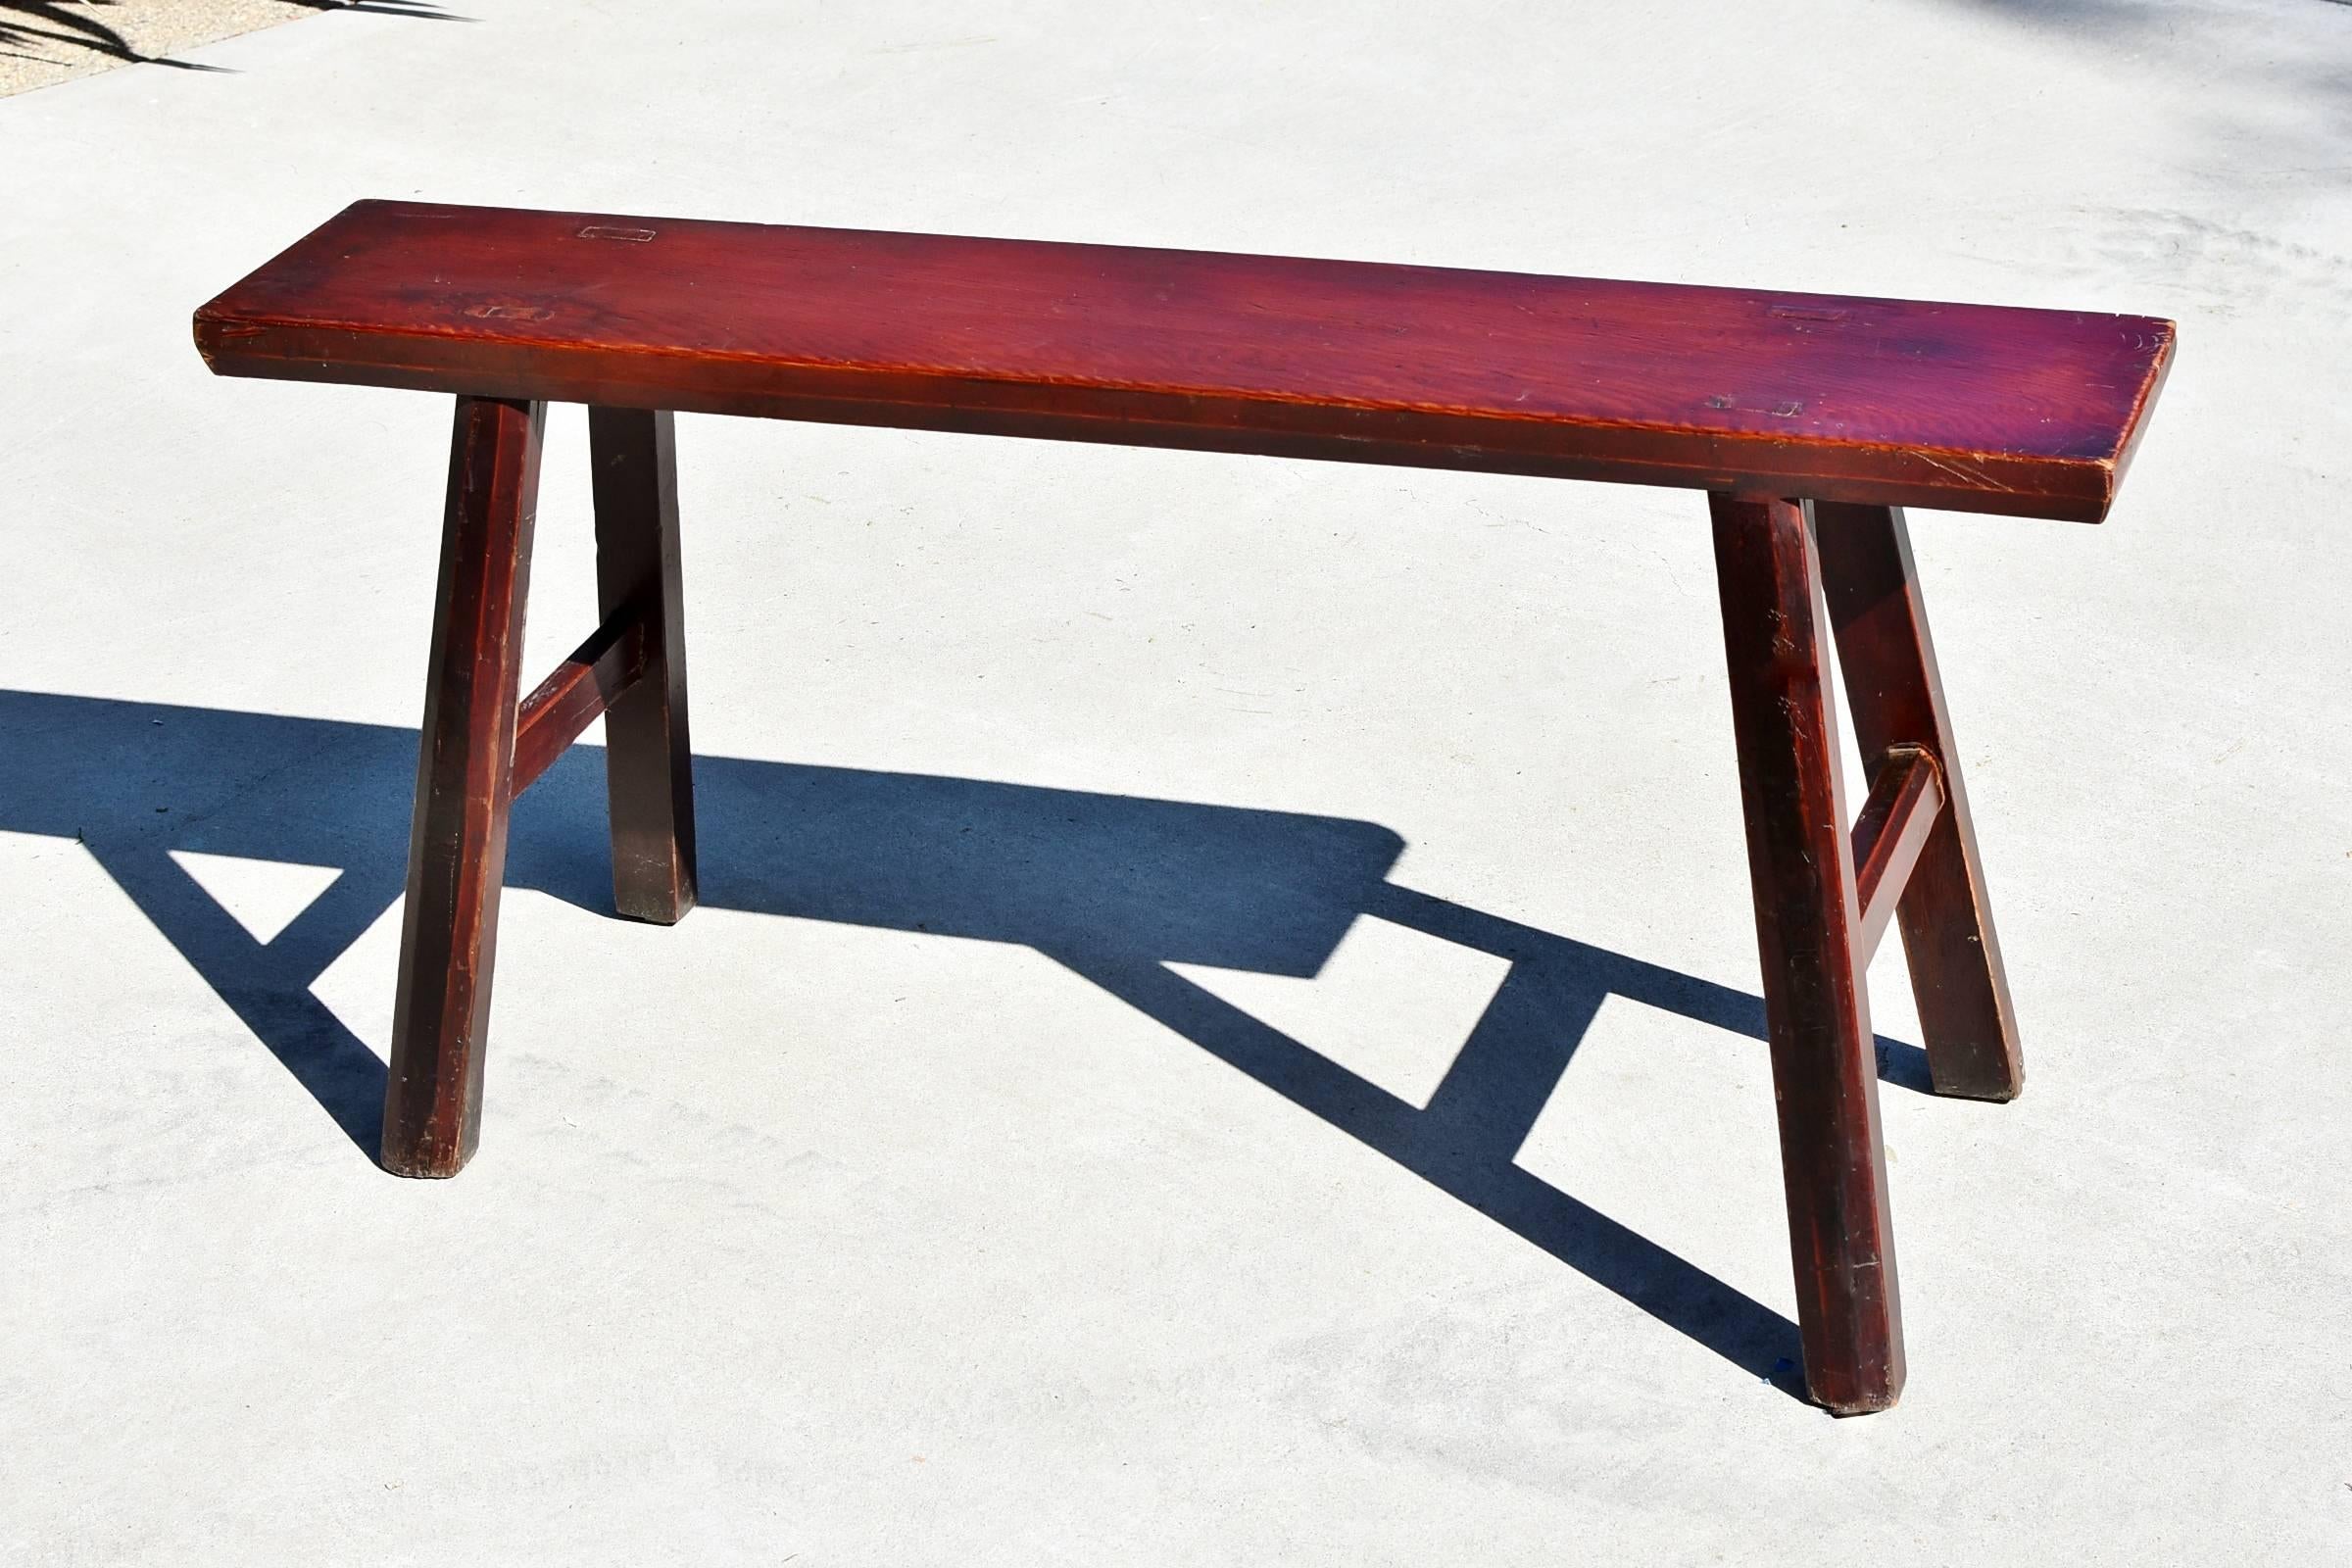 Antique Chinese Bench, Solid Wood, Reddish Brown 5